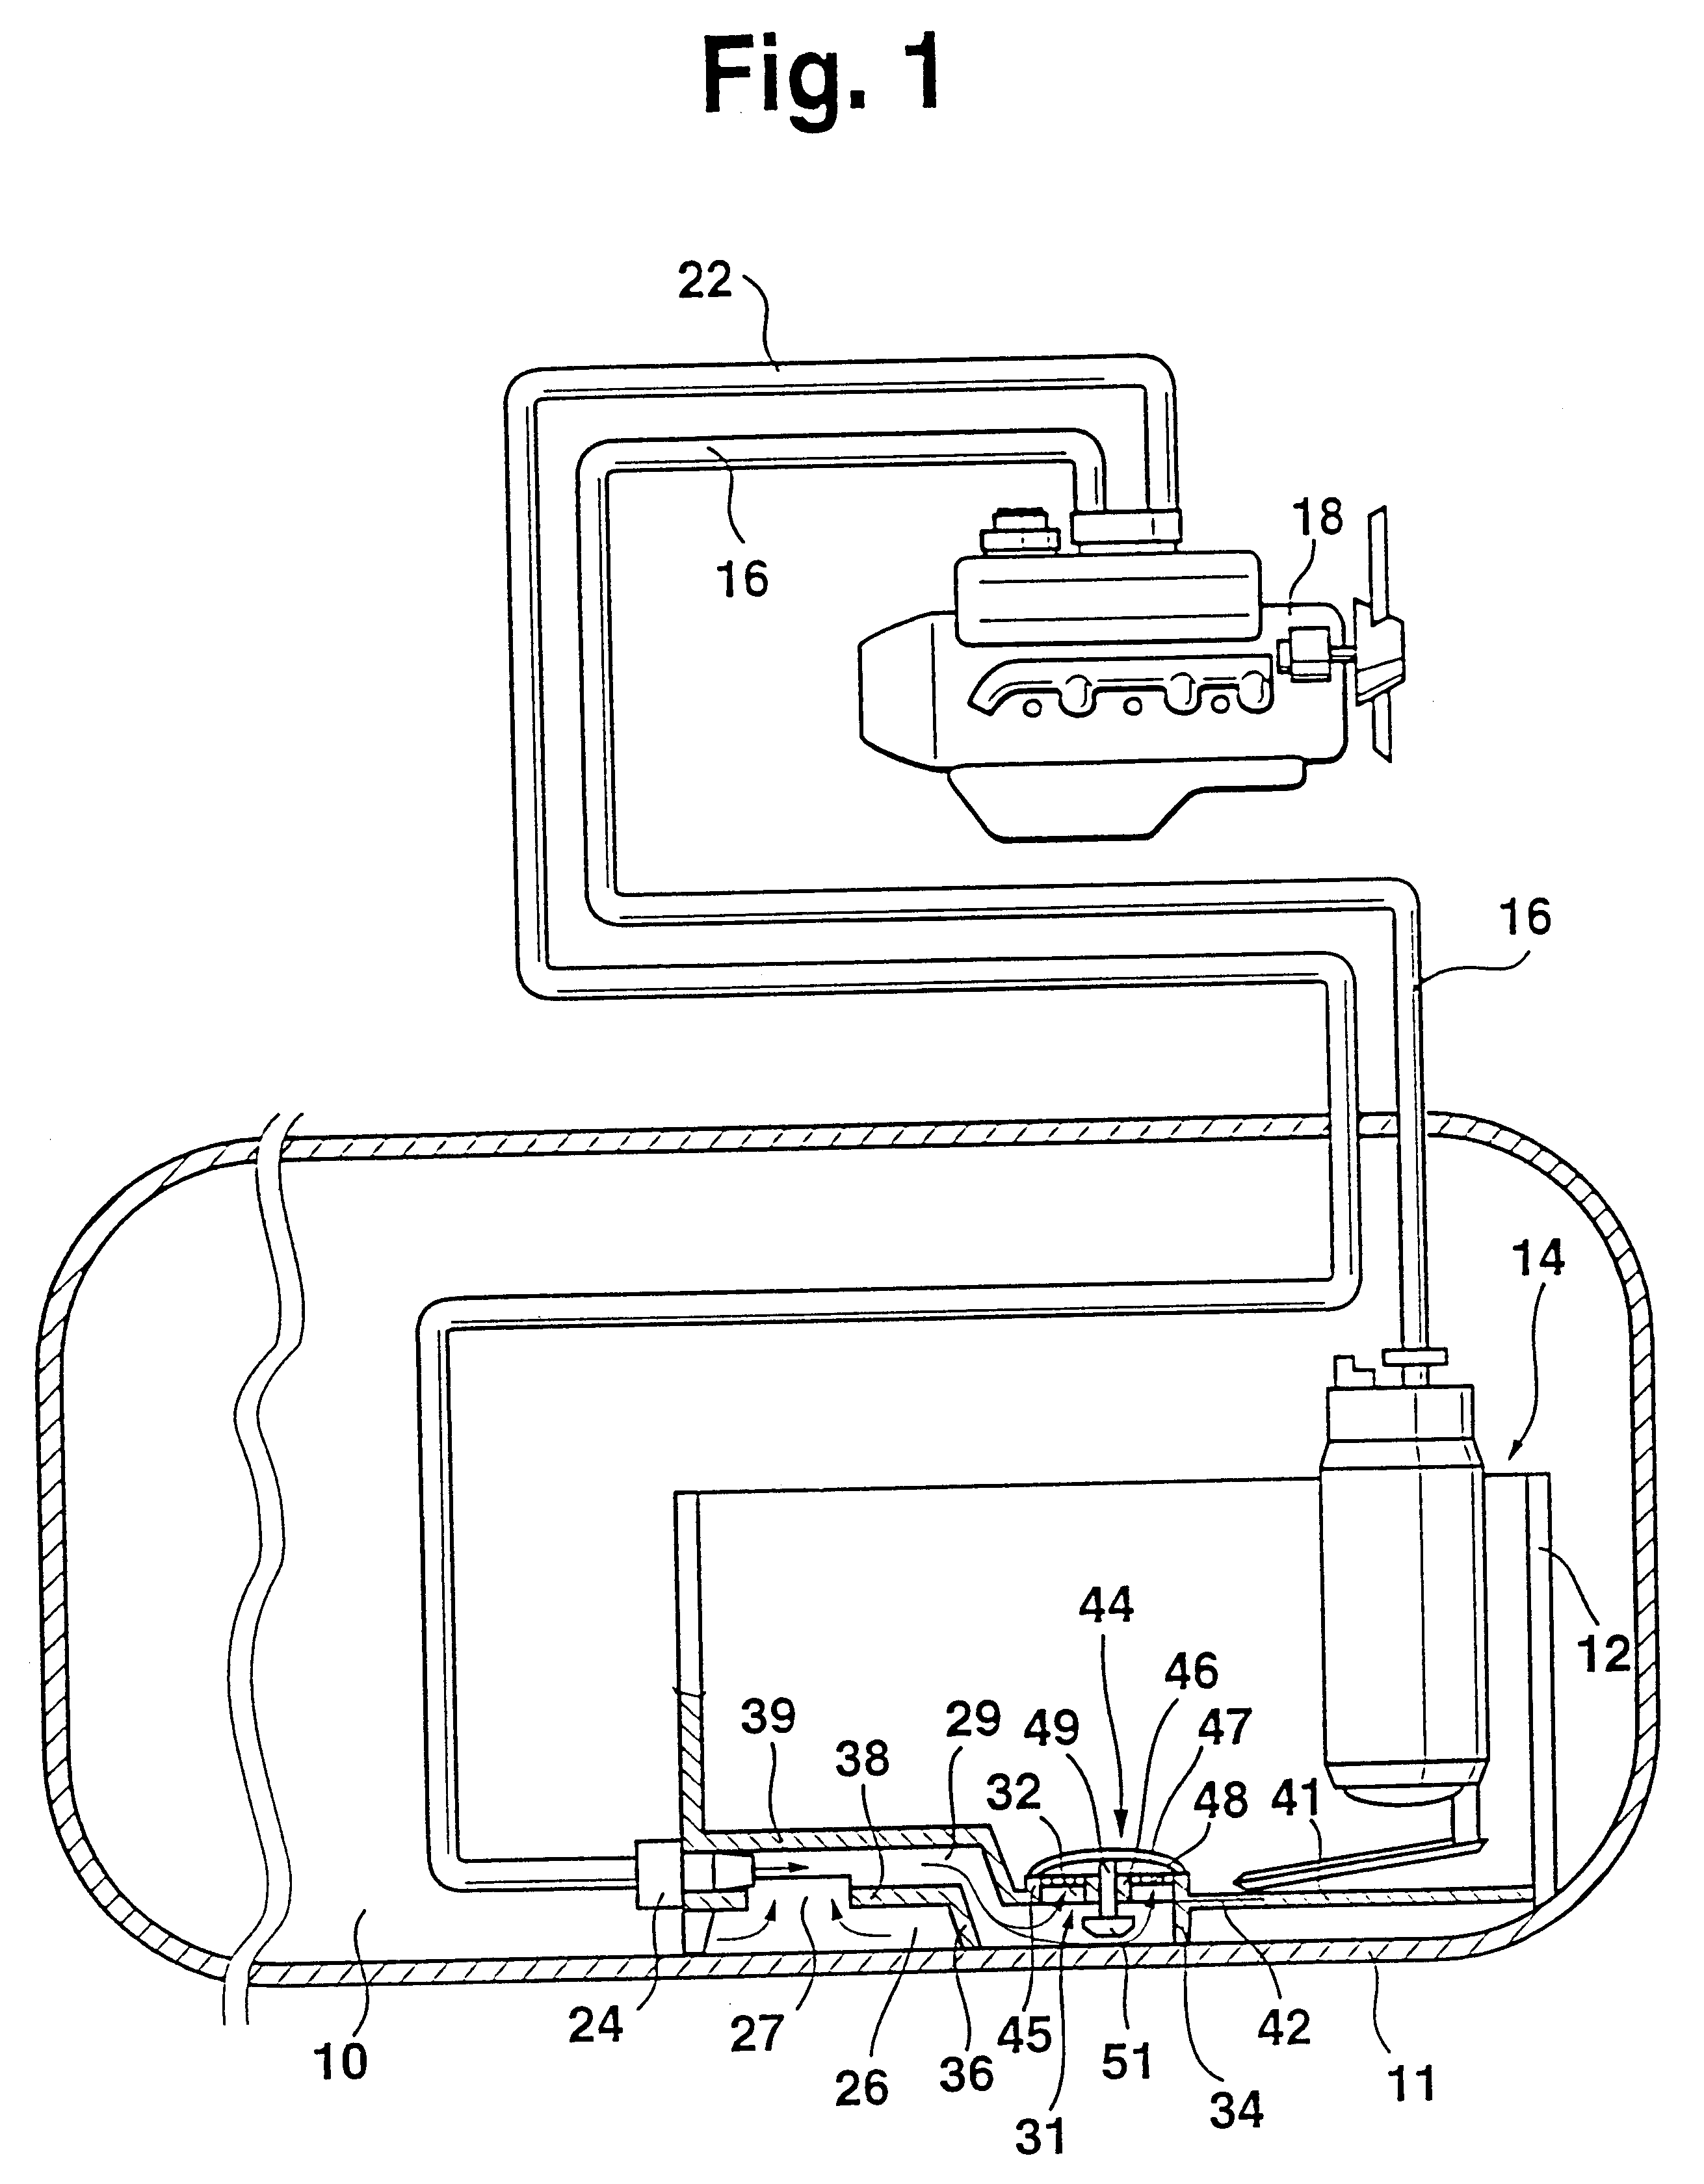 Device for conveying fuel from a reserve pot to the internal combustion engine of a motor vehicle